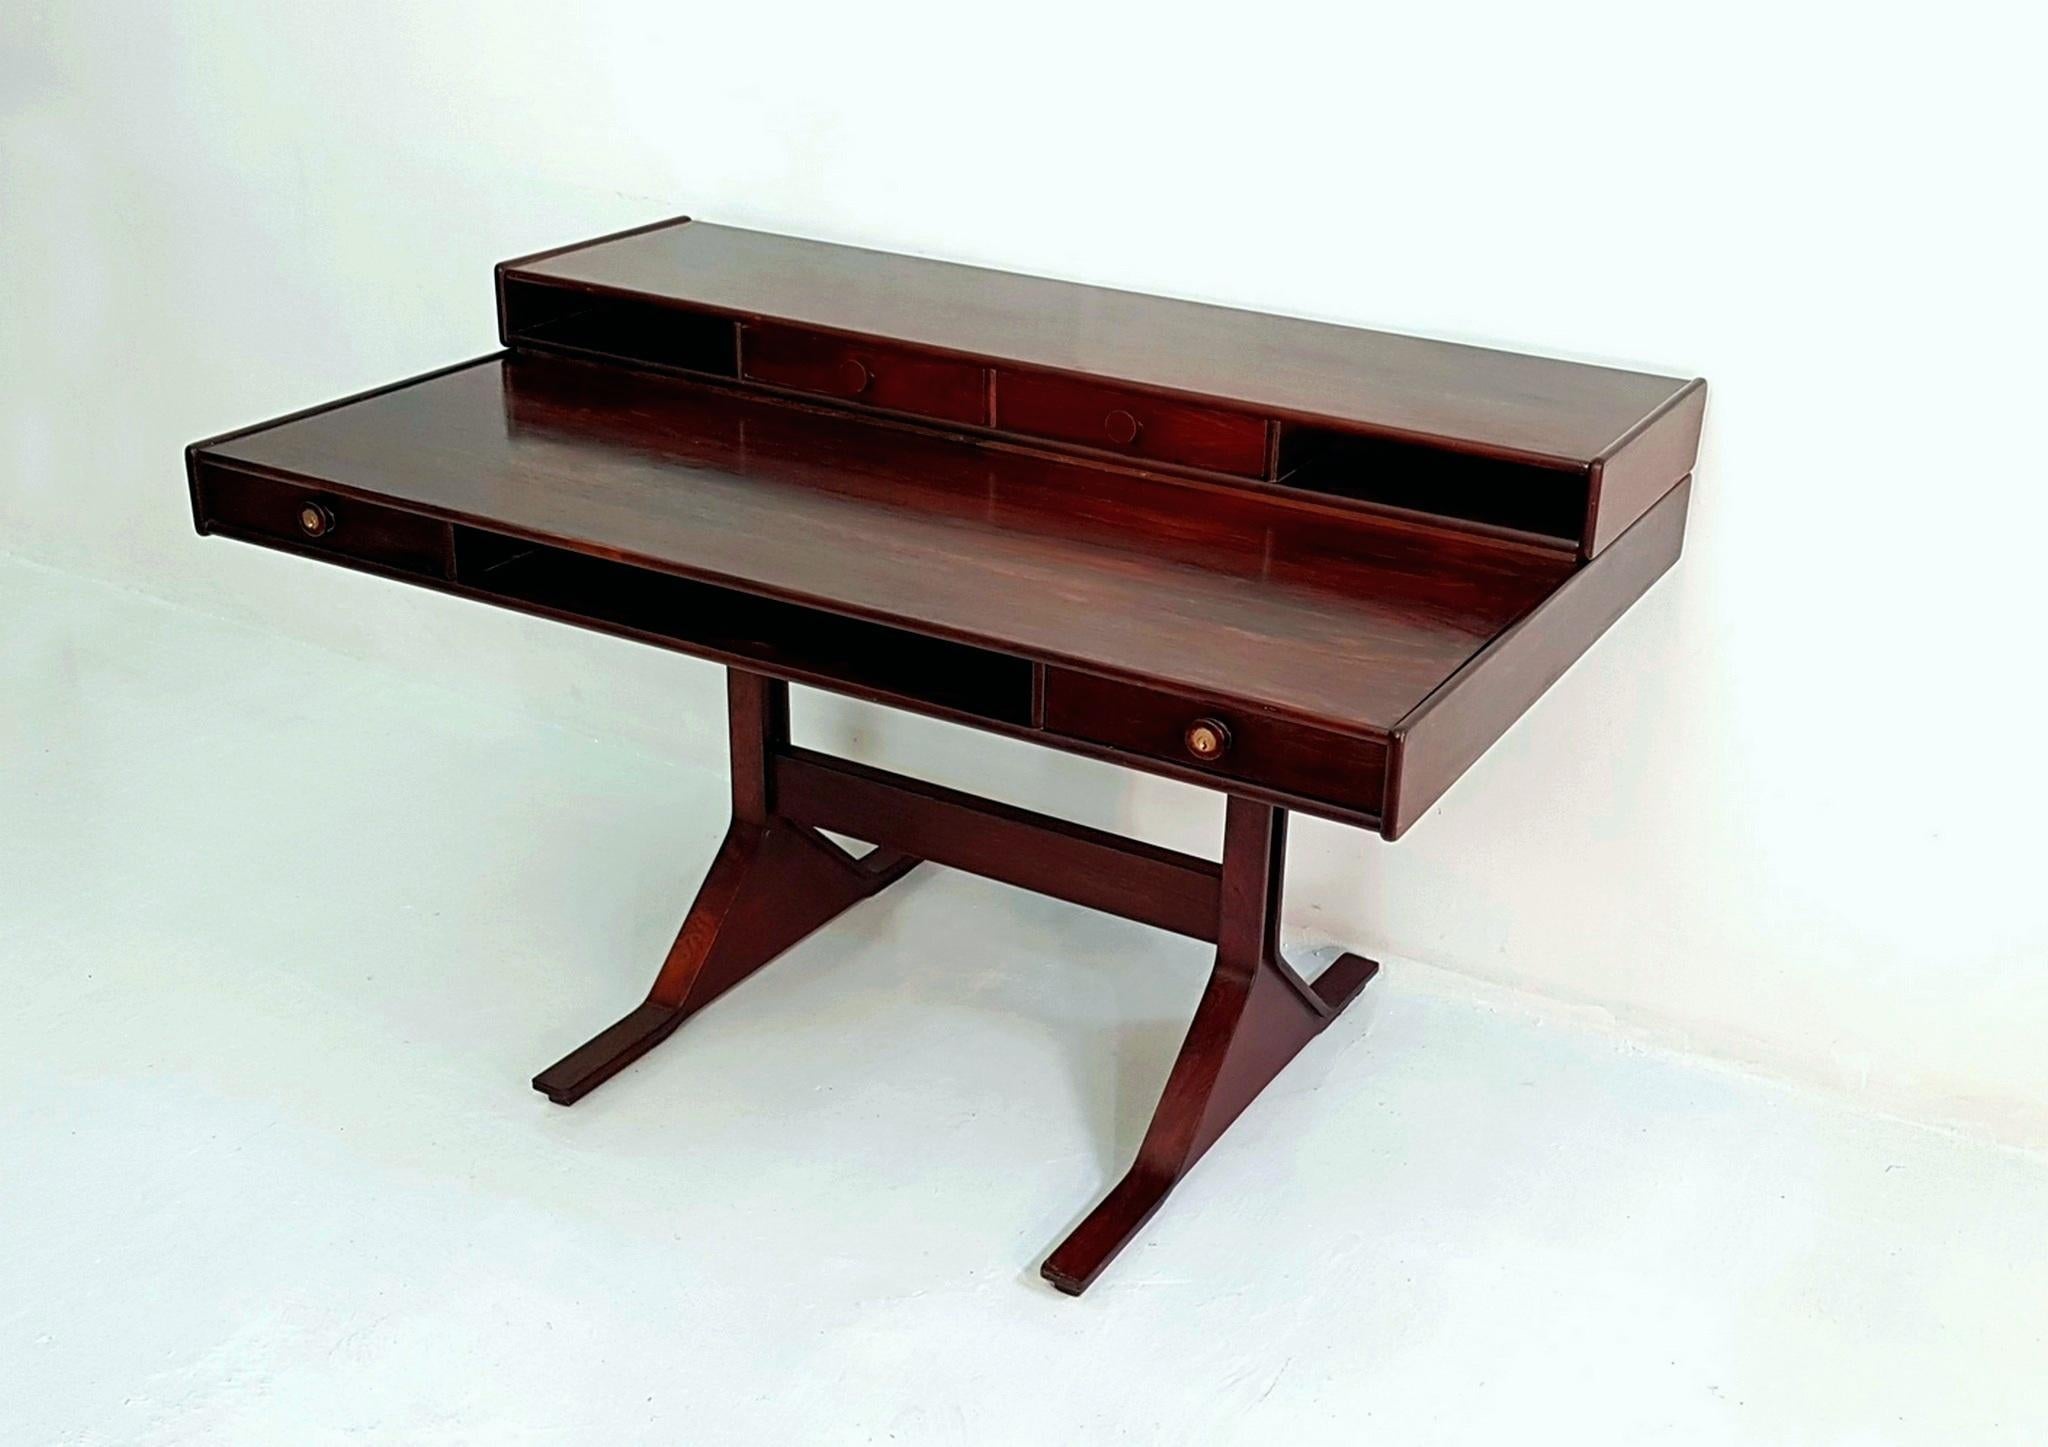 Behold, a masterpiece of design and function, the Classic Writing Desk Model 530, a creation of the renowned Gianfranco Frattini, crafted by the skilled hands of Bernini in Milan, Italy in the year of 1963. The desk bears witness to the passage of